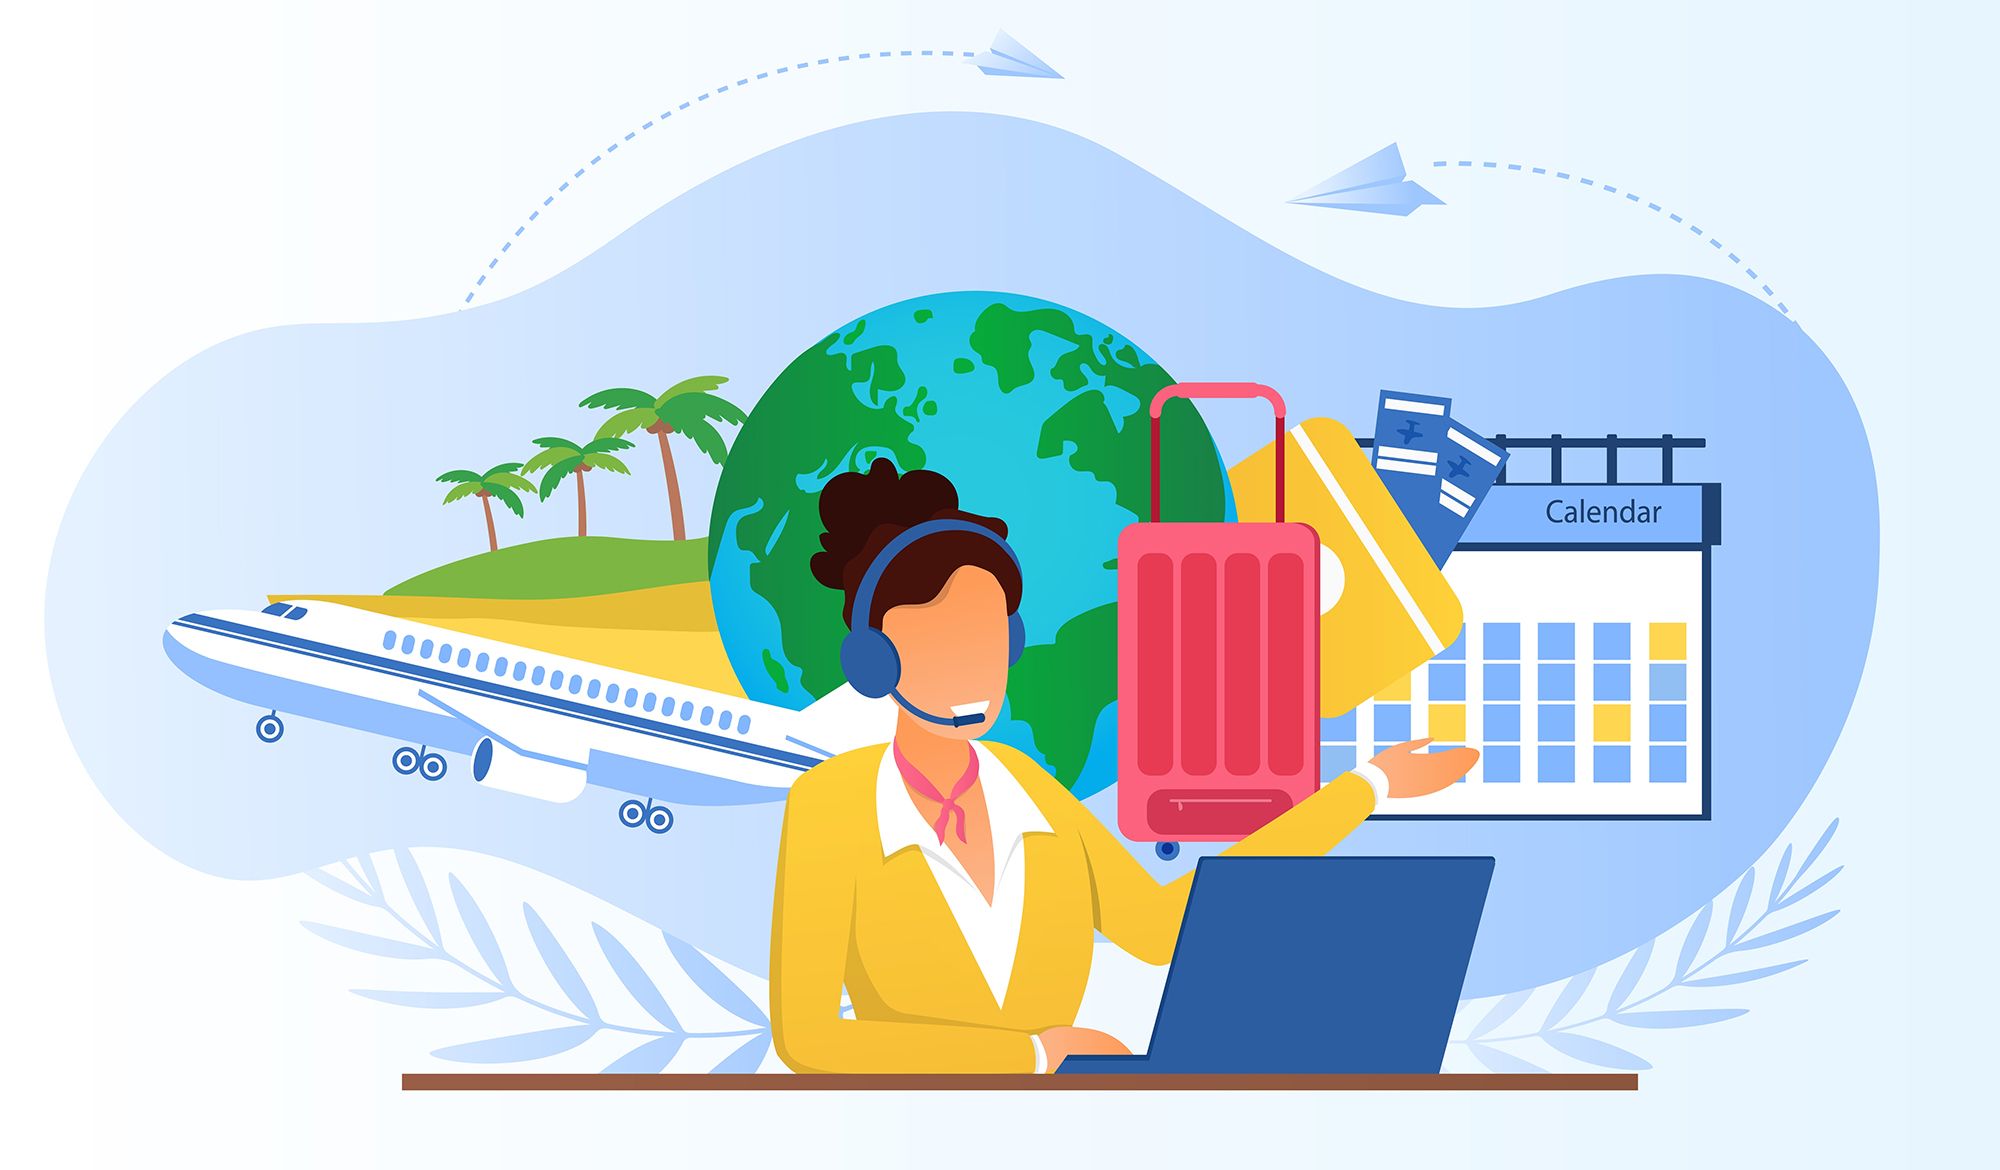 Buoyed by 2X growth since Flipkart acquisition, Cleartrip aims to become a travel superapp

